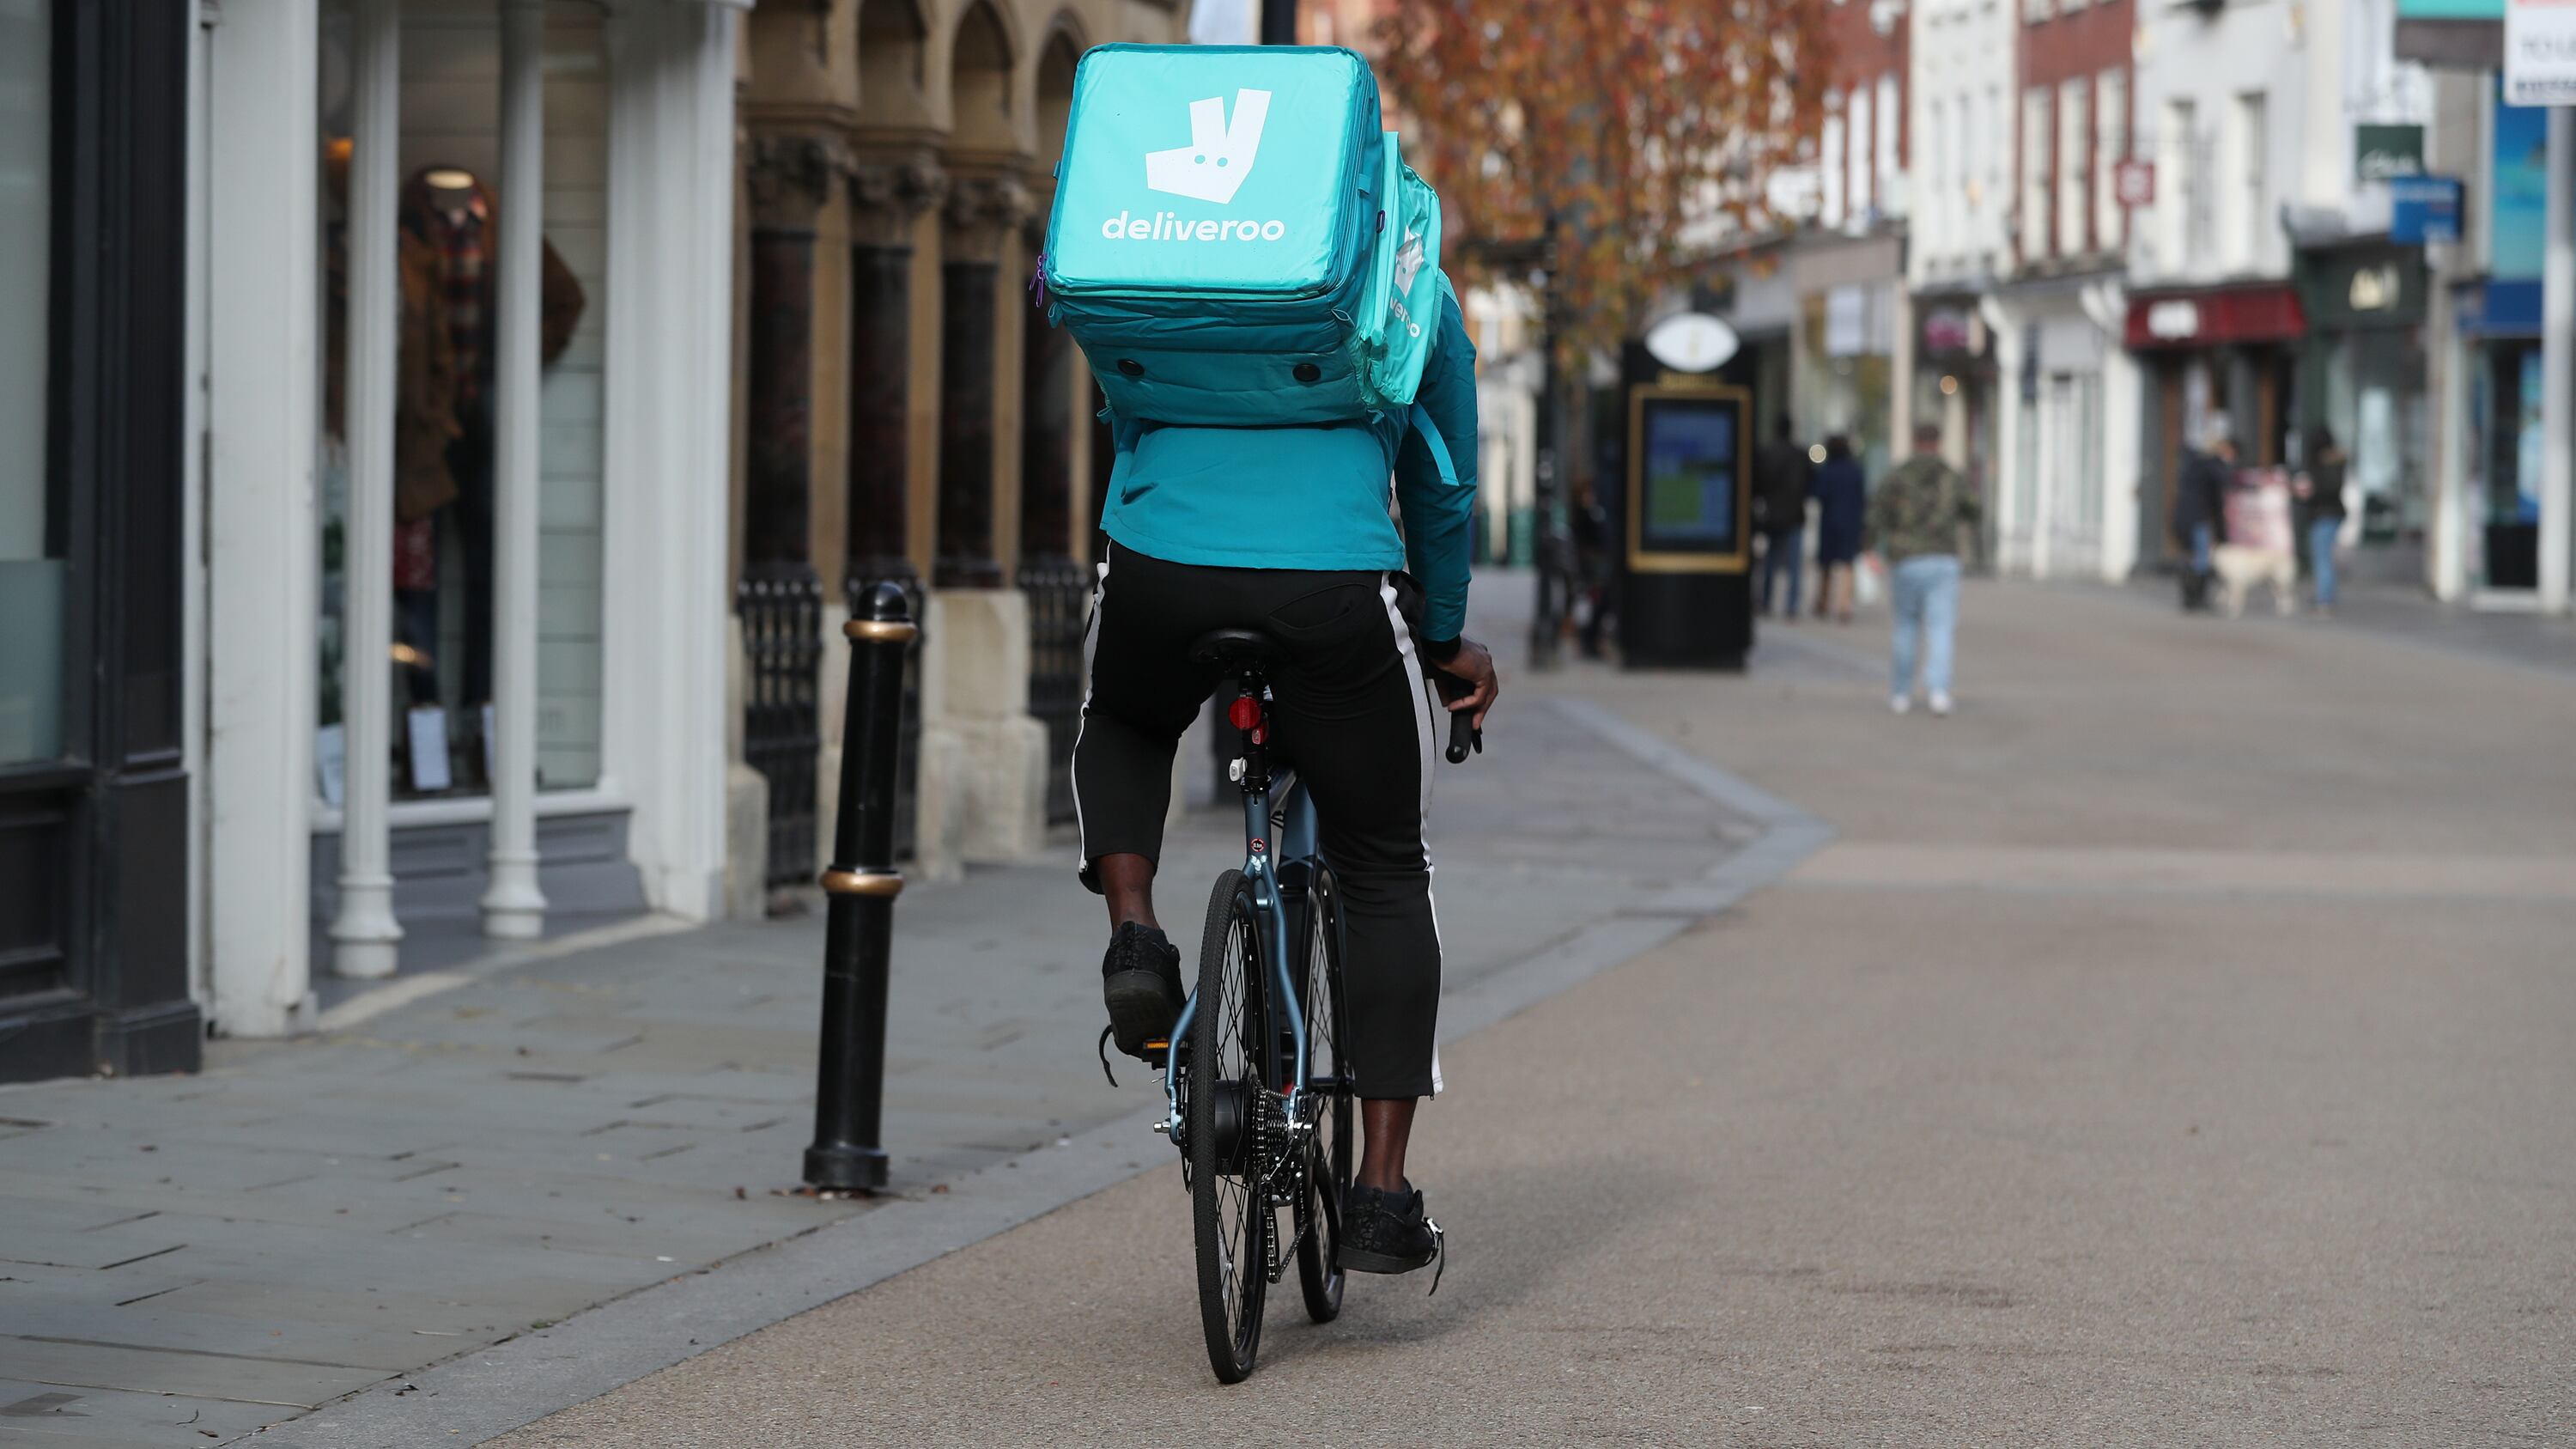 Shares in Deliveroo have been given a boost by speculation that the group is in the sights of US rival Doordash